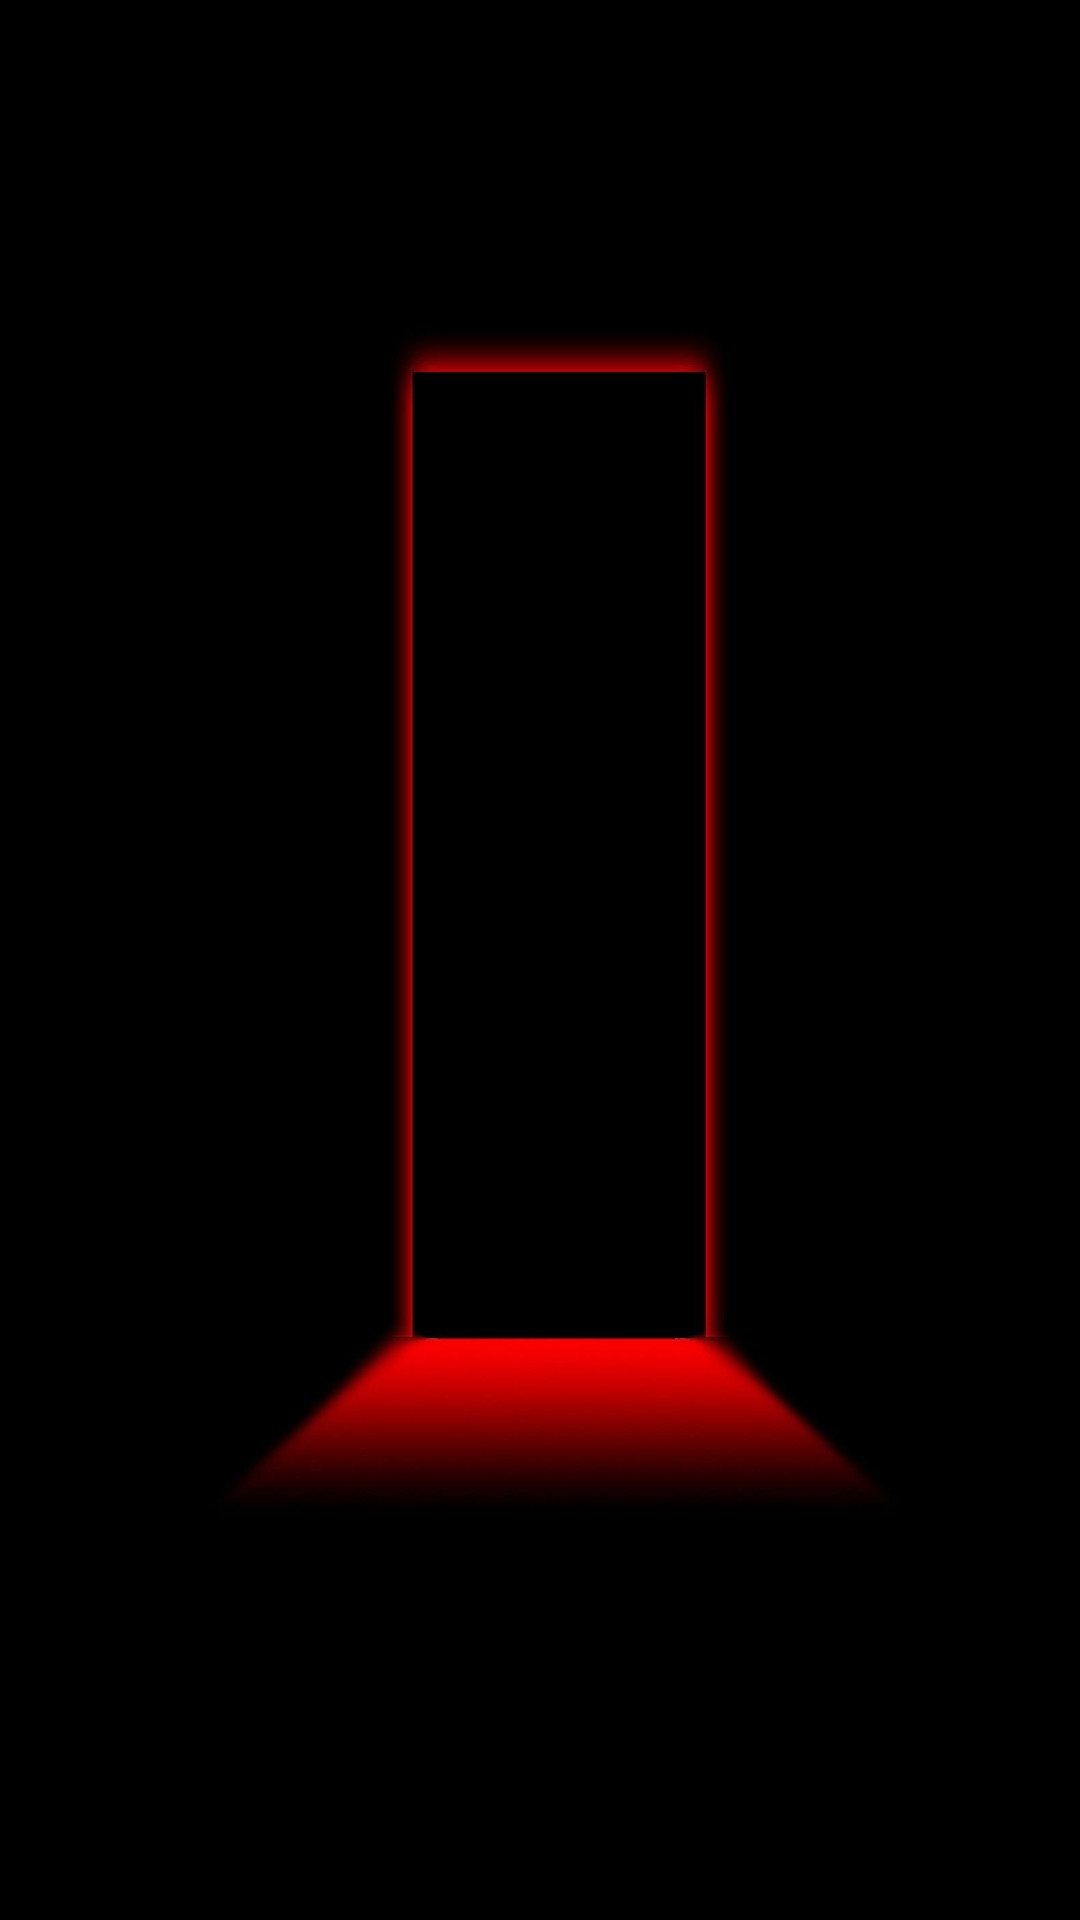 1080x1920 Black And Red Iphone 5 Wallpaper